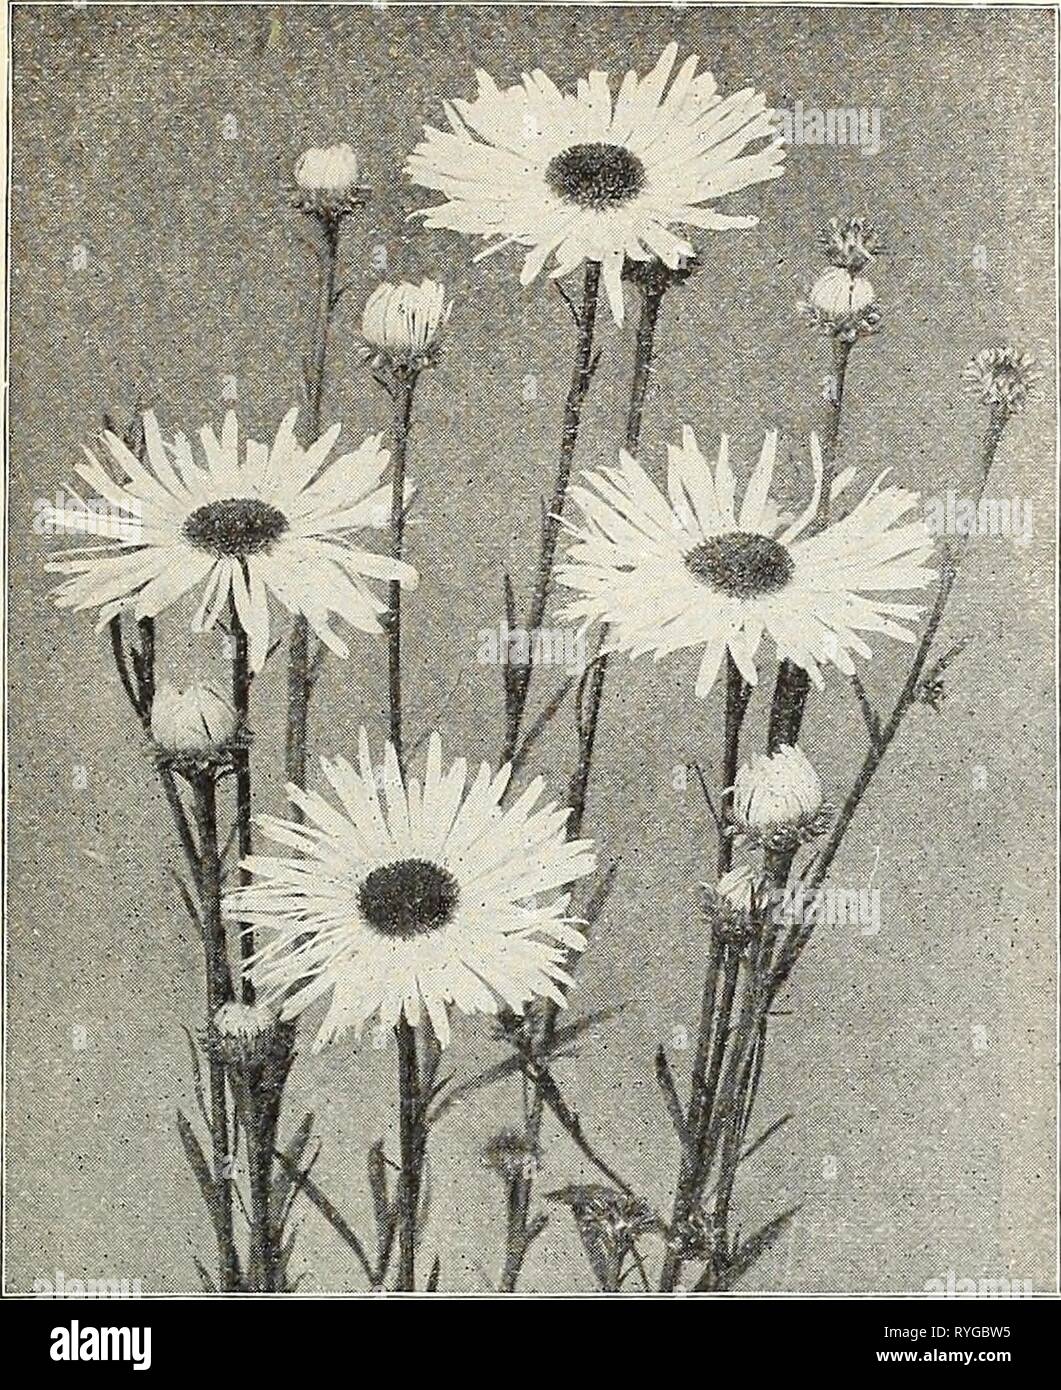 Dreer's wholesale price list : flower seeds for florists plants for florists bulbs for florists vegetable seeds fertilizers, fungicides, insecticides, implements, etc  dreerswholesalep1924henr Year: 1924  KENRY A. DREER, PHILADELPHIA, PA., WHOLESALE PRICE LIST 57    Asteroides. Lsitisqusiitia Boltouia Boltonia (False Chamomile) Per dor.. Per 100 3 1/2 -inch pots $1 50 SIO 00 3 1/2 -inch pots 1 50 10 OO Callirhoe (Poppy Mallow) Involucrata. 3  -inch pots 1 75 12 0 Caltha (Marsh Marigold) Palustris. 3-inch pots 1 50 10 00 Campanula (Bell Flower) Calycaiitheuia. A choice mixture. Sc- inch pots 1  Stock Photo